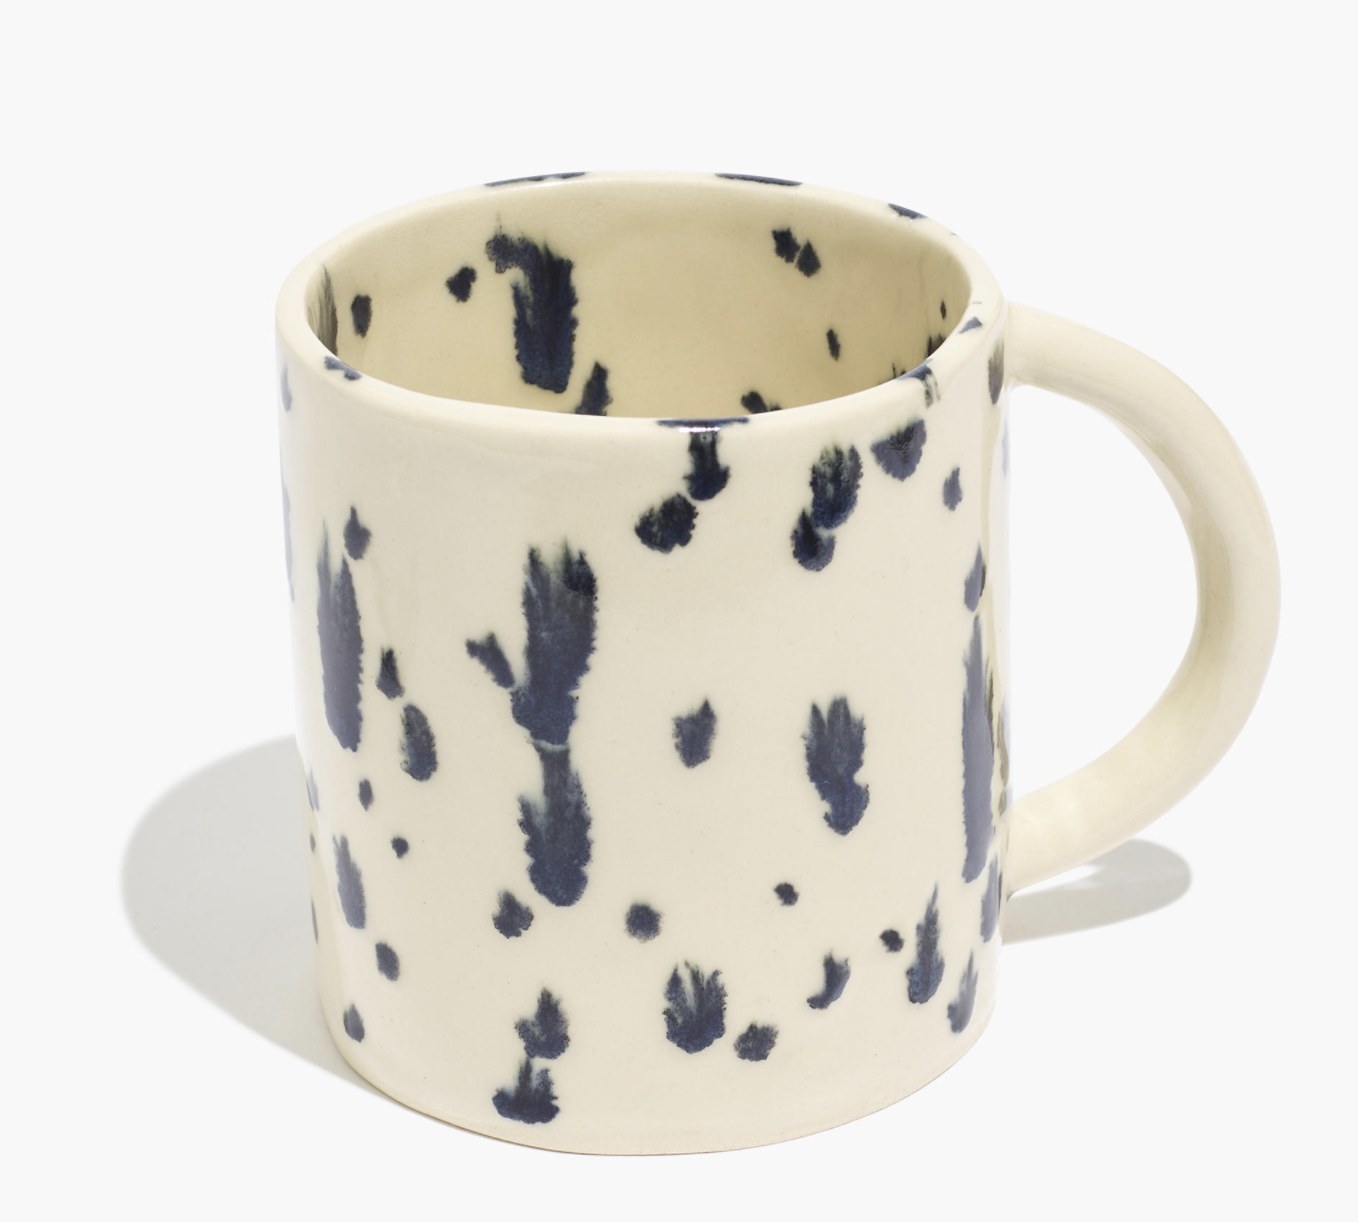 a cream-colored mug with black specks in a cow pattern